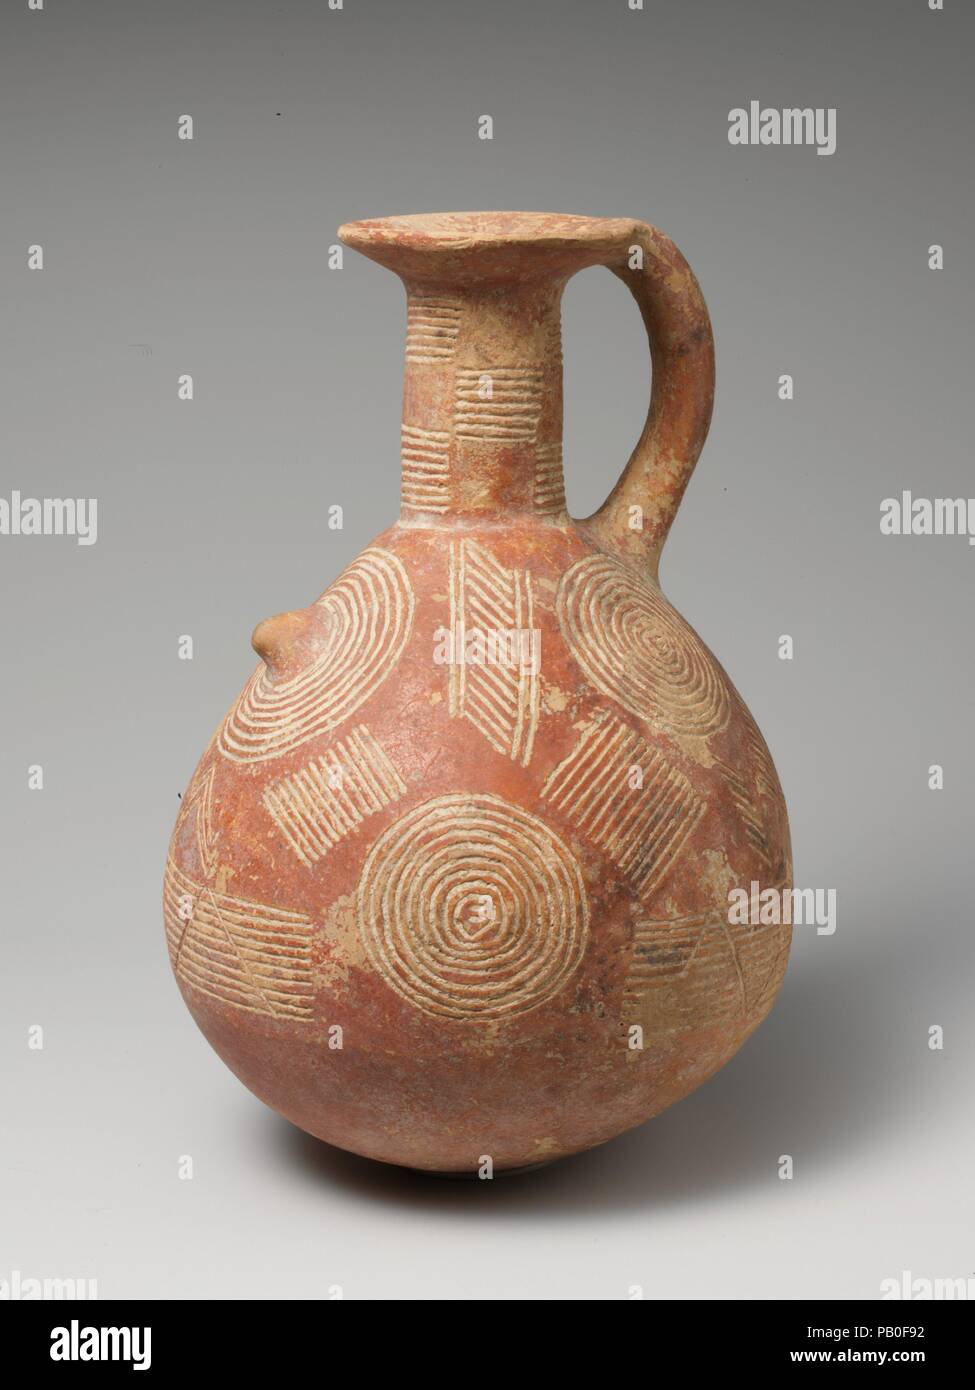 Terracotta jug. Culture: Cypriot. Dimensions: H. 7 5/16 in. (18.6 cm). Date: ca. 2500-1900 B.C..  Globular with handle, concentric circles and groups of lines. Museum: Metropolitan Museum of Art, New York, USA. Stock Photo